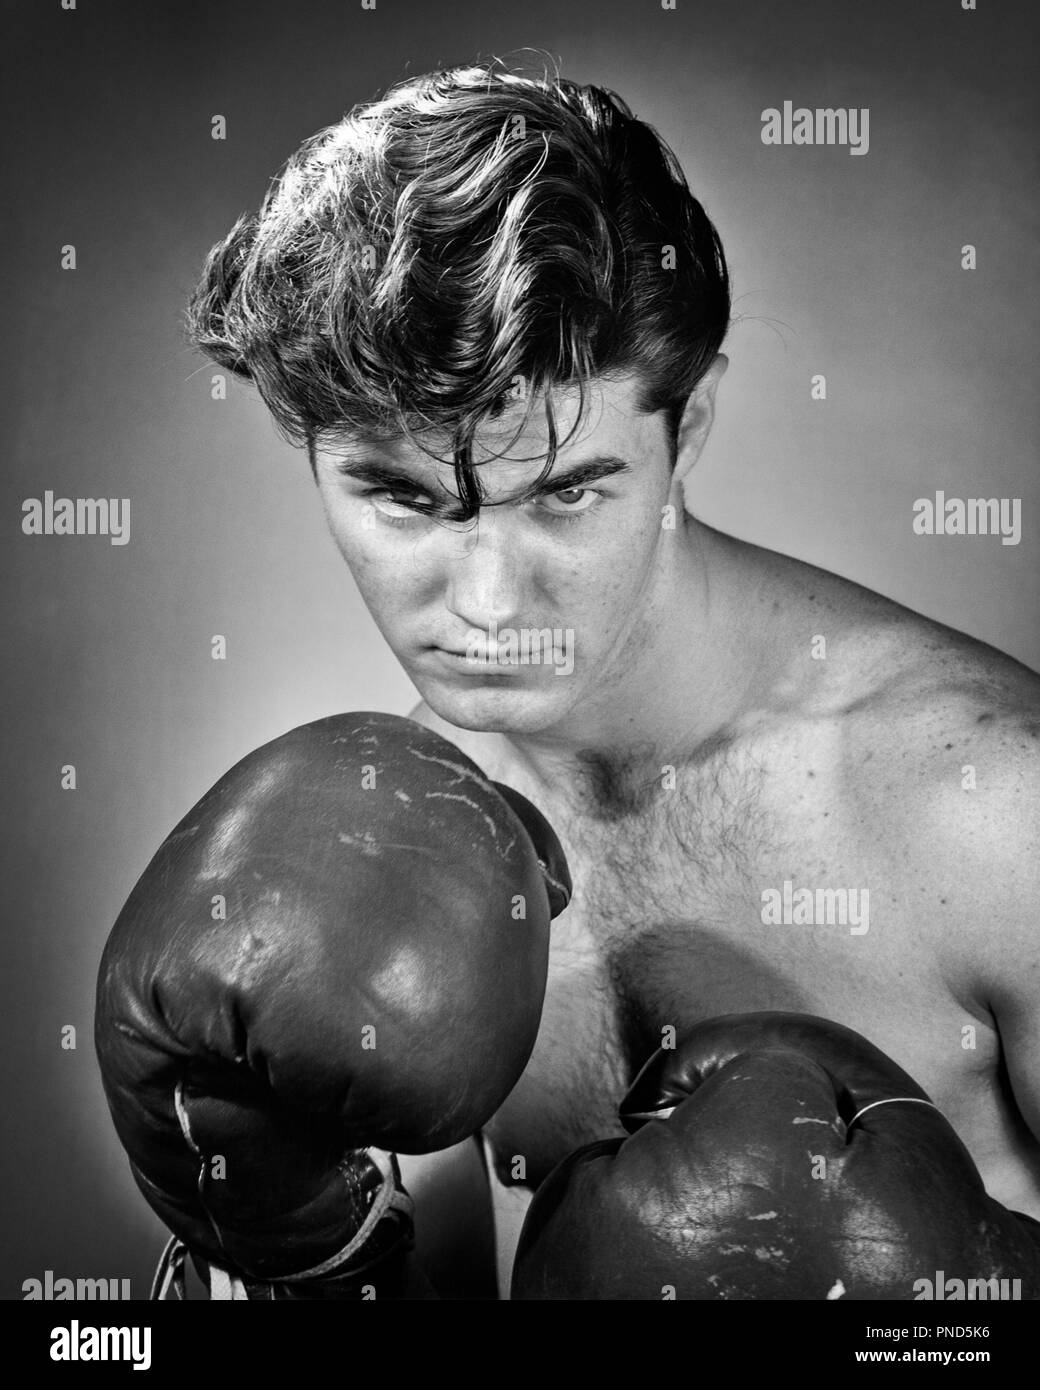 1950s PORTRAIT PRIZE FIGHTER BOXER HAIR FALLING INTO HIS EYES SERIOUS EXPRESSION LOOKING AT CAMERA - p1830 CLE003 HARS EYE CONTACT MEAN FIGHTER HEAD AND SHOULDERS STRENGTH COURAGE POISED PRIZE RECREATION INTO OCCUPATIONS KILLER LONE DETERMINED COMBATIVE TOUGH YOUNG ADULT MAN BLACK AND WHITE CAUCASIAN ETHNICITY OLD FASHIONED Stock Photo